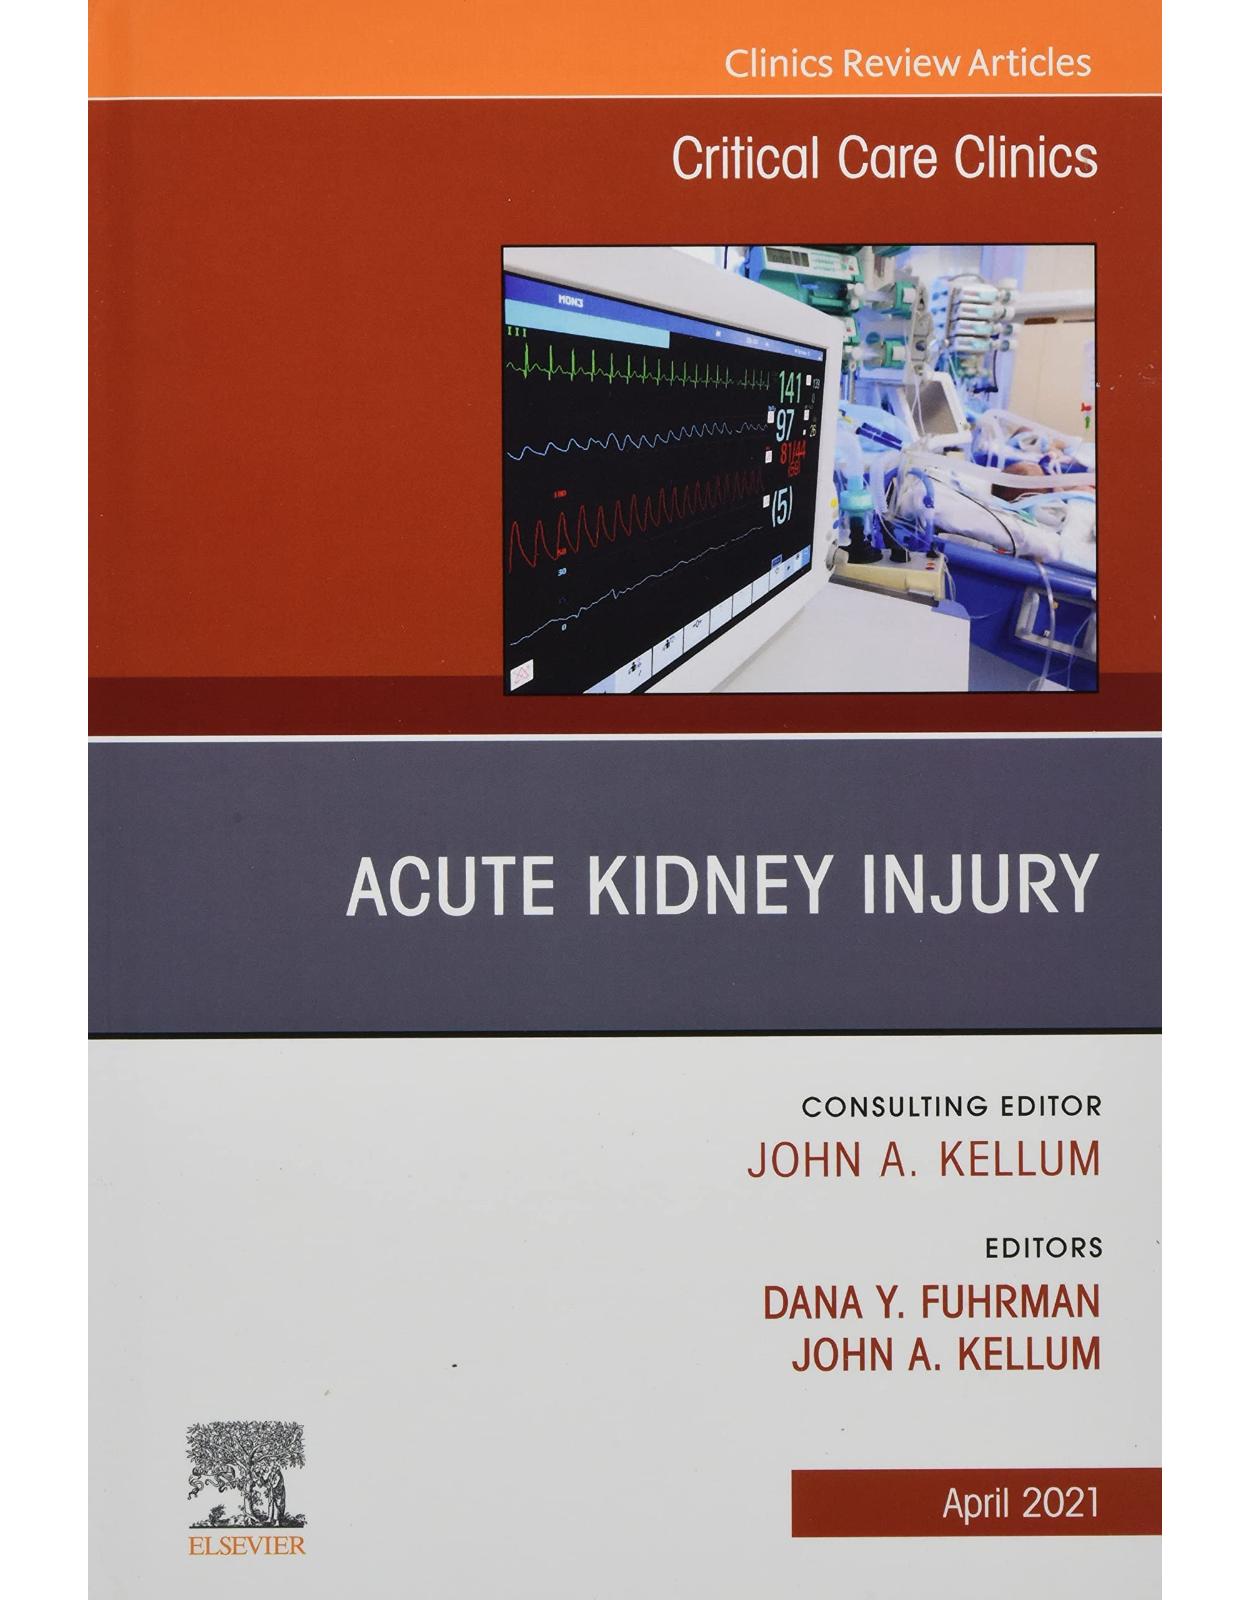 Acute Kidney Injury, An Issue of Critical Care Clinics (Volume 37-2) (The Clinics: Internal Medicine, Volume 37-2)